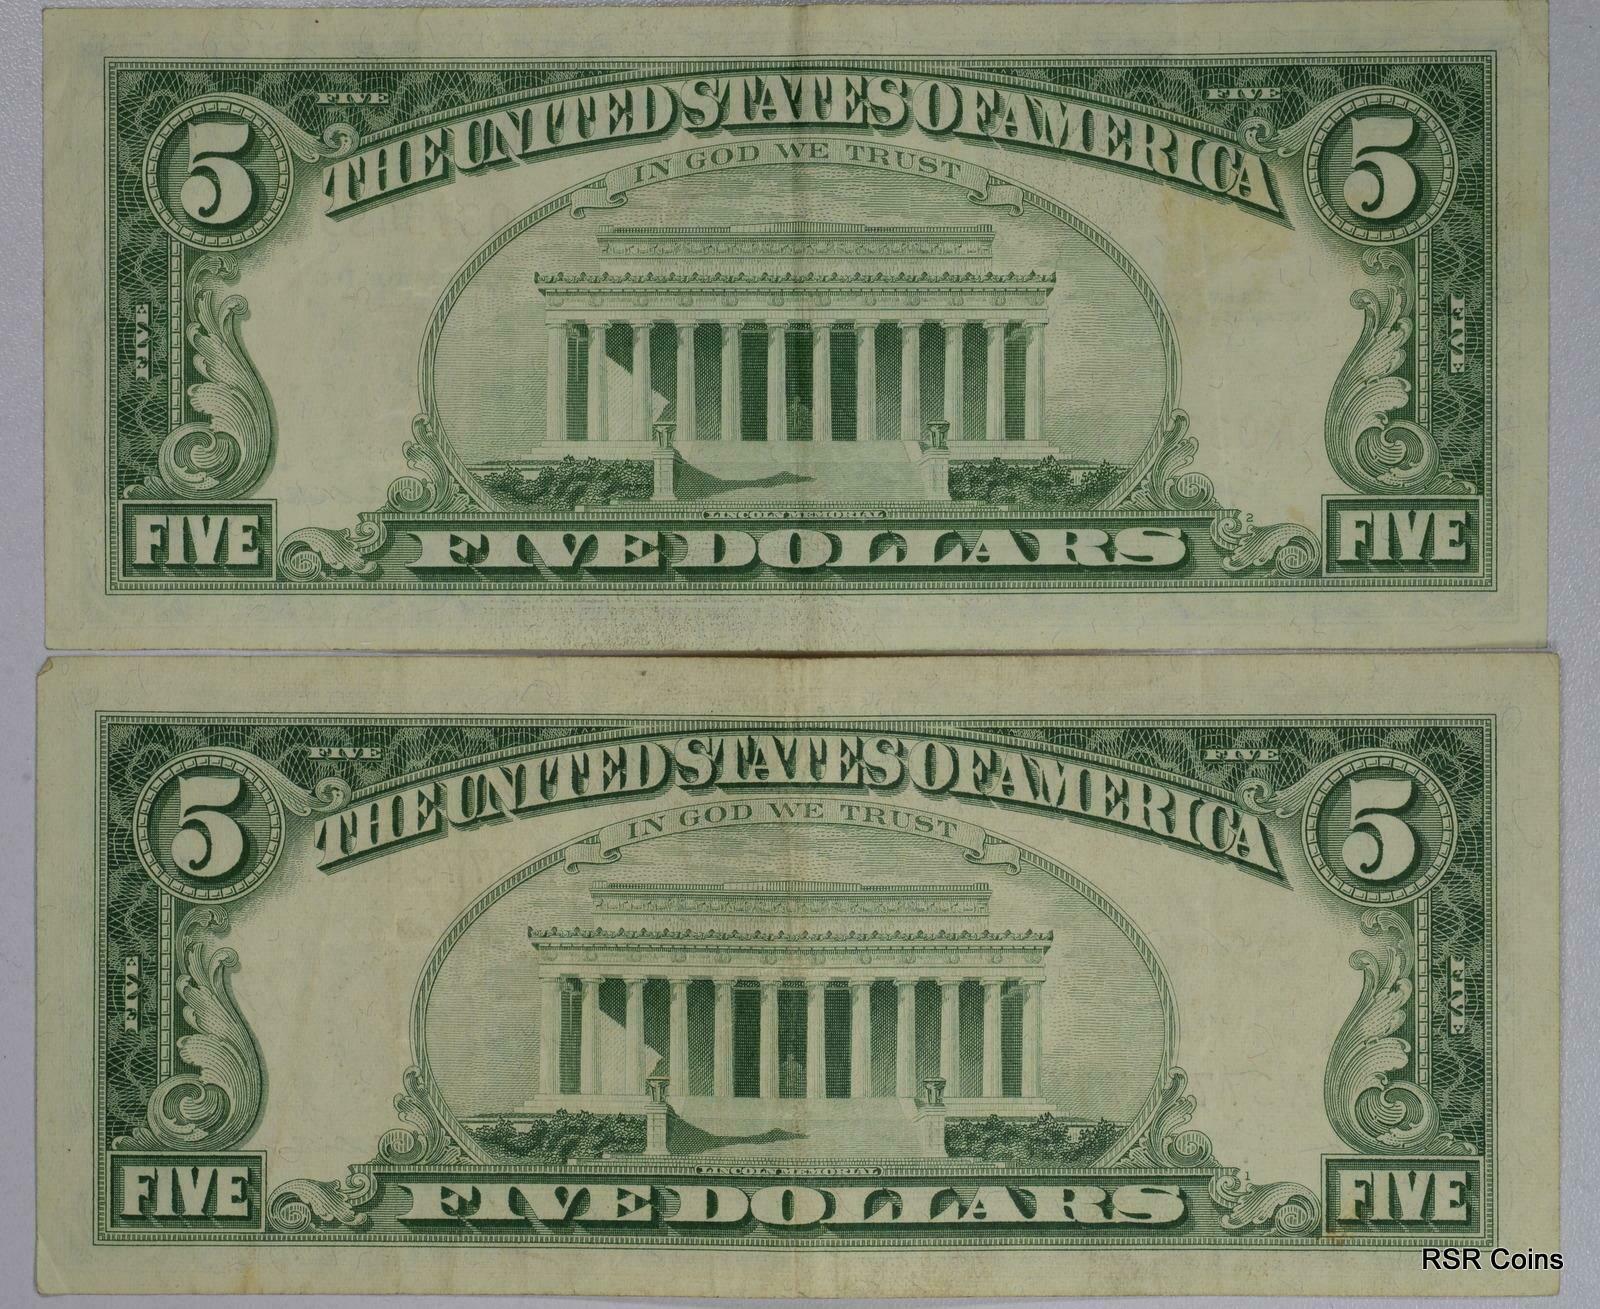 LOT OF 2- 1963 $5 US NOTE RED SEAL VF+!! #10648